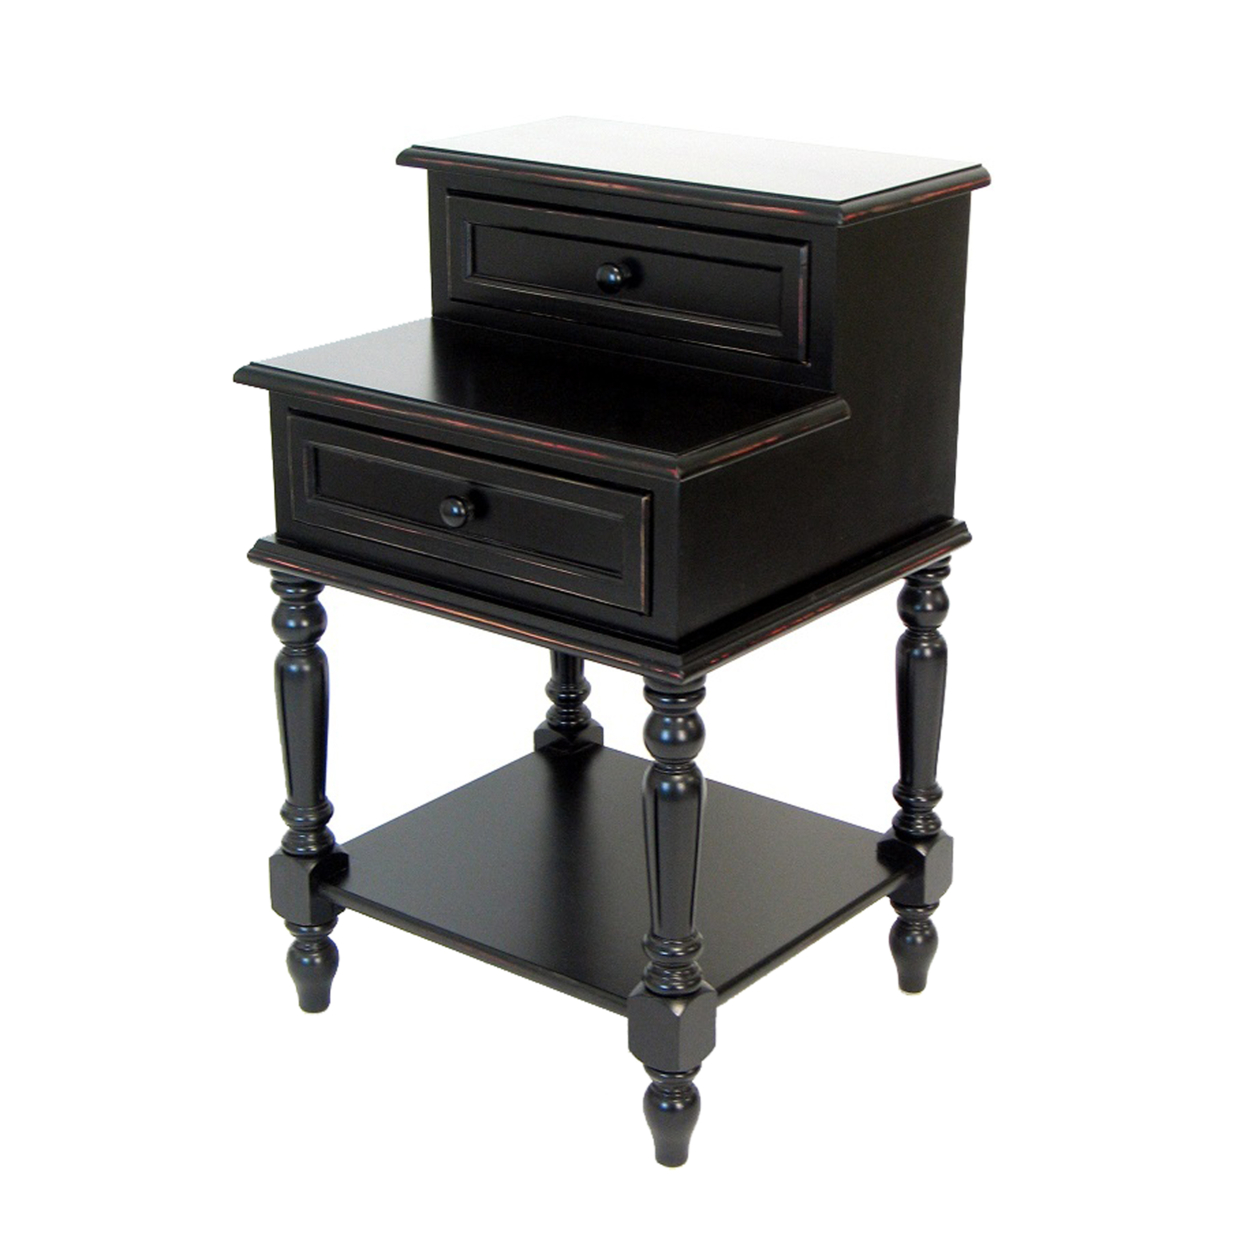 2 Step Drawers Wooden Frame End Table With Turned Legs, Black- Saltoro Sherpi